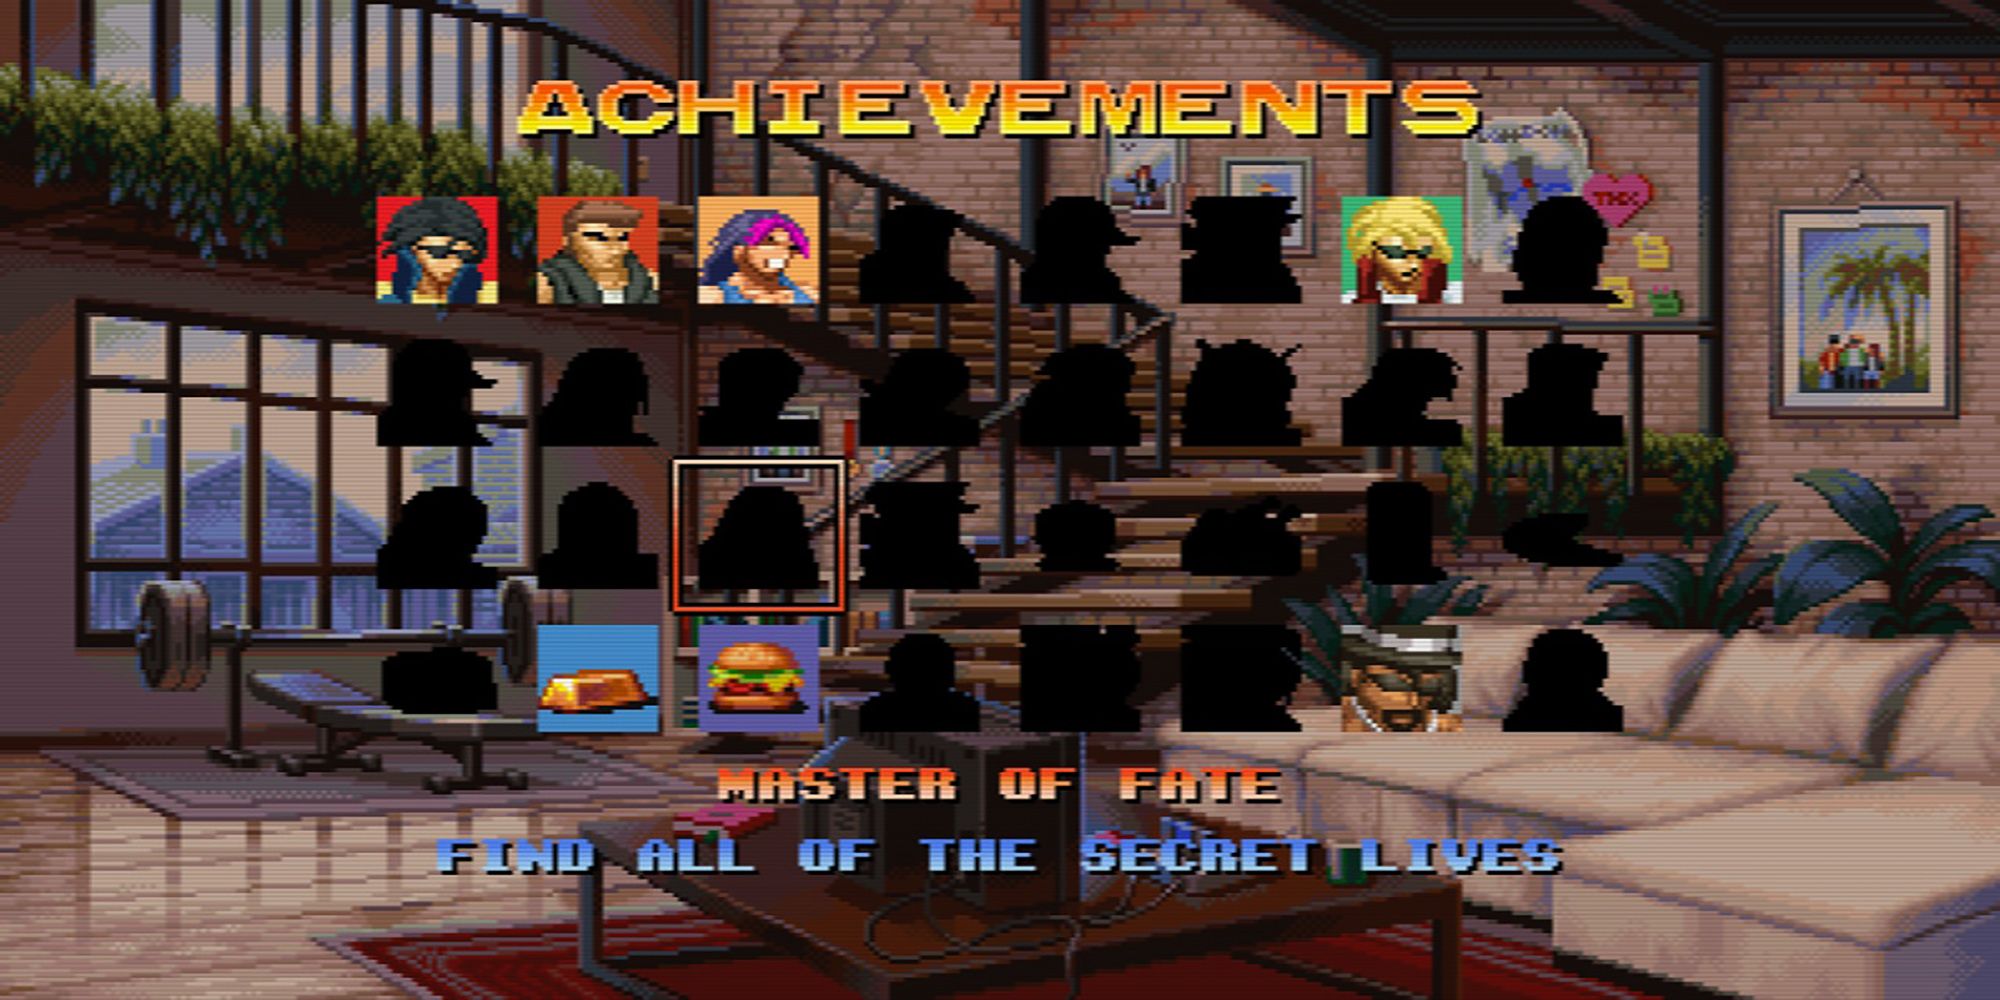 The Master Of Fate Achievement is awarded when a player finds all the secret lives in Final Vendetta.